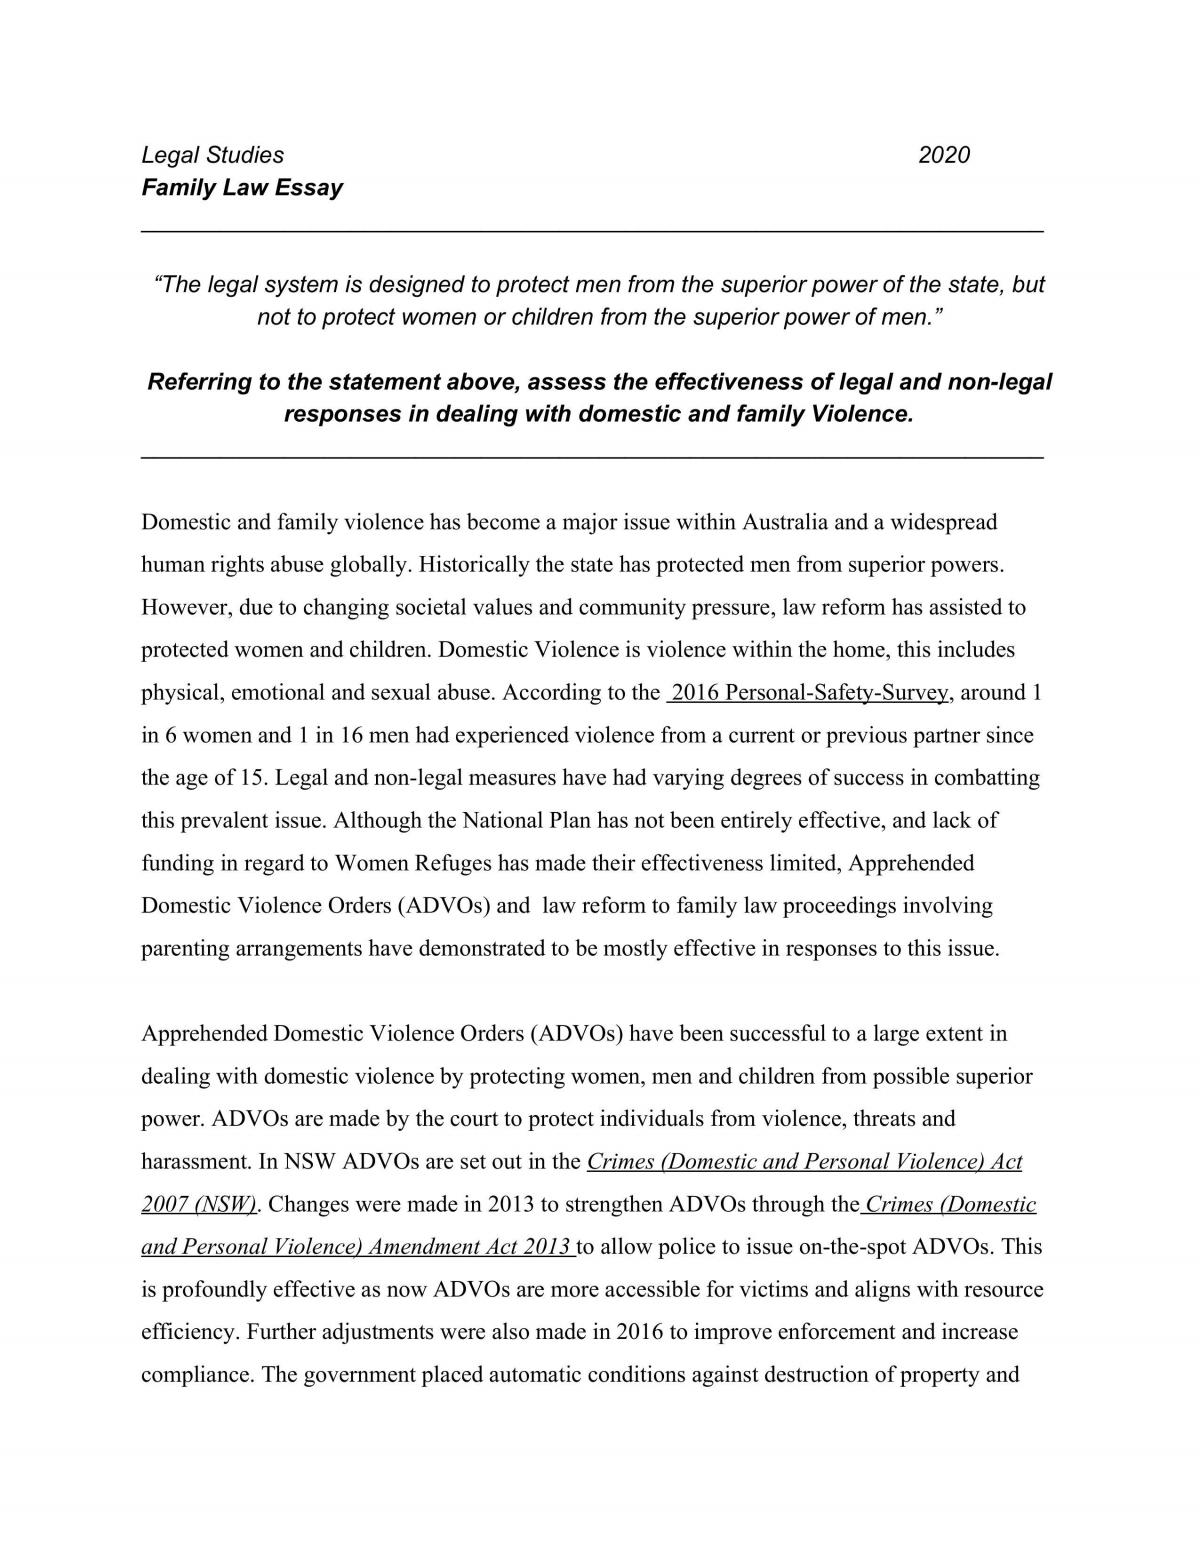 Effectiveness of Legal and Non-Legal Responses in Dealing with Domestic and Family Violence - Page 1